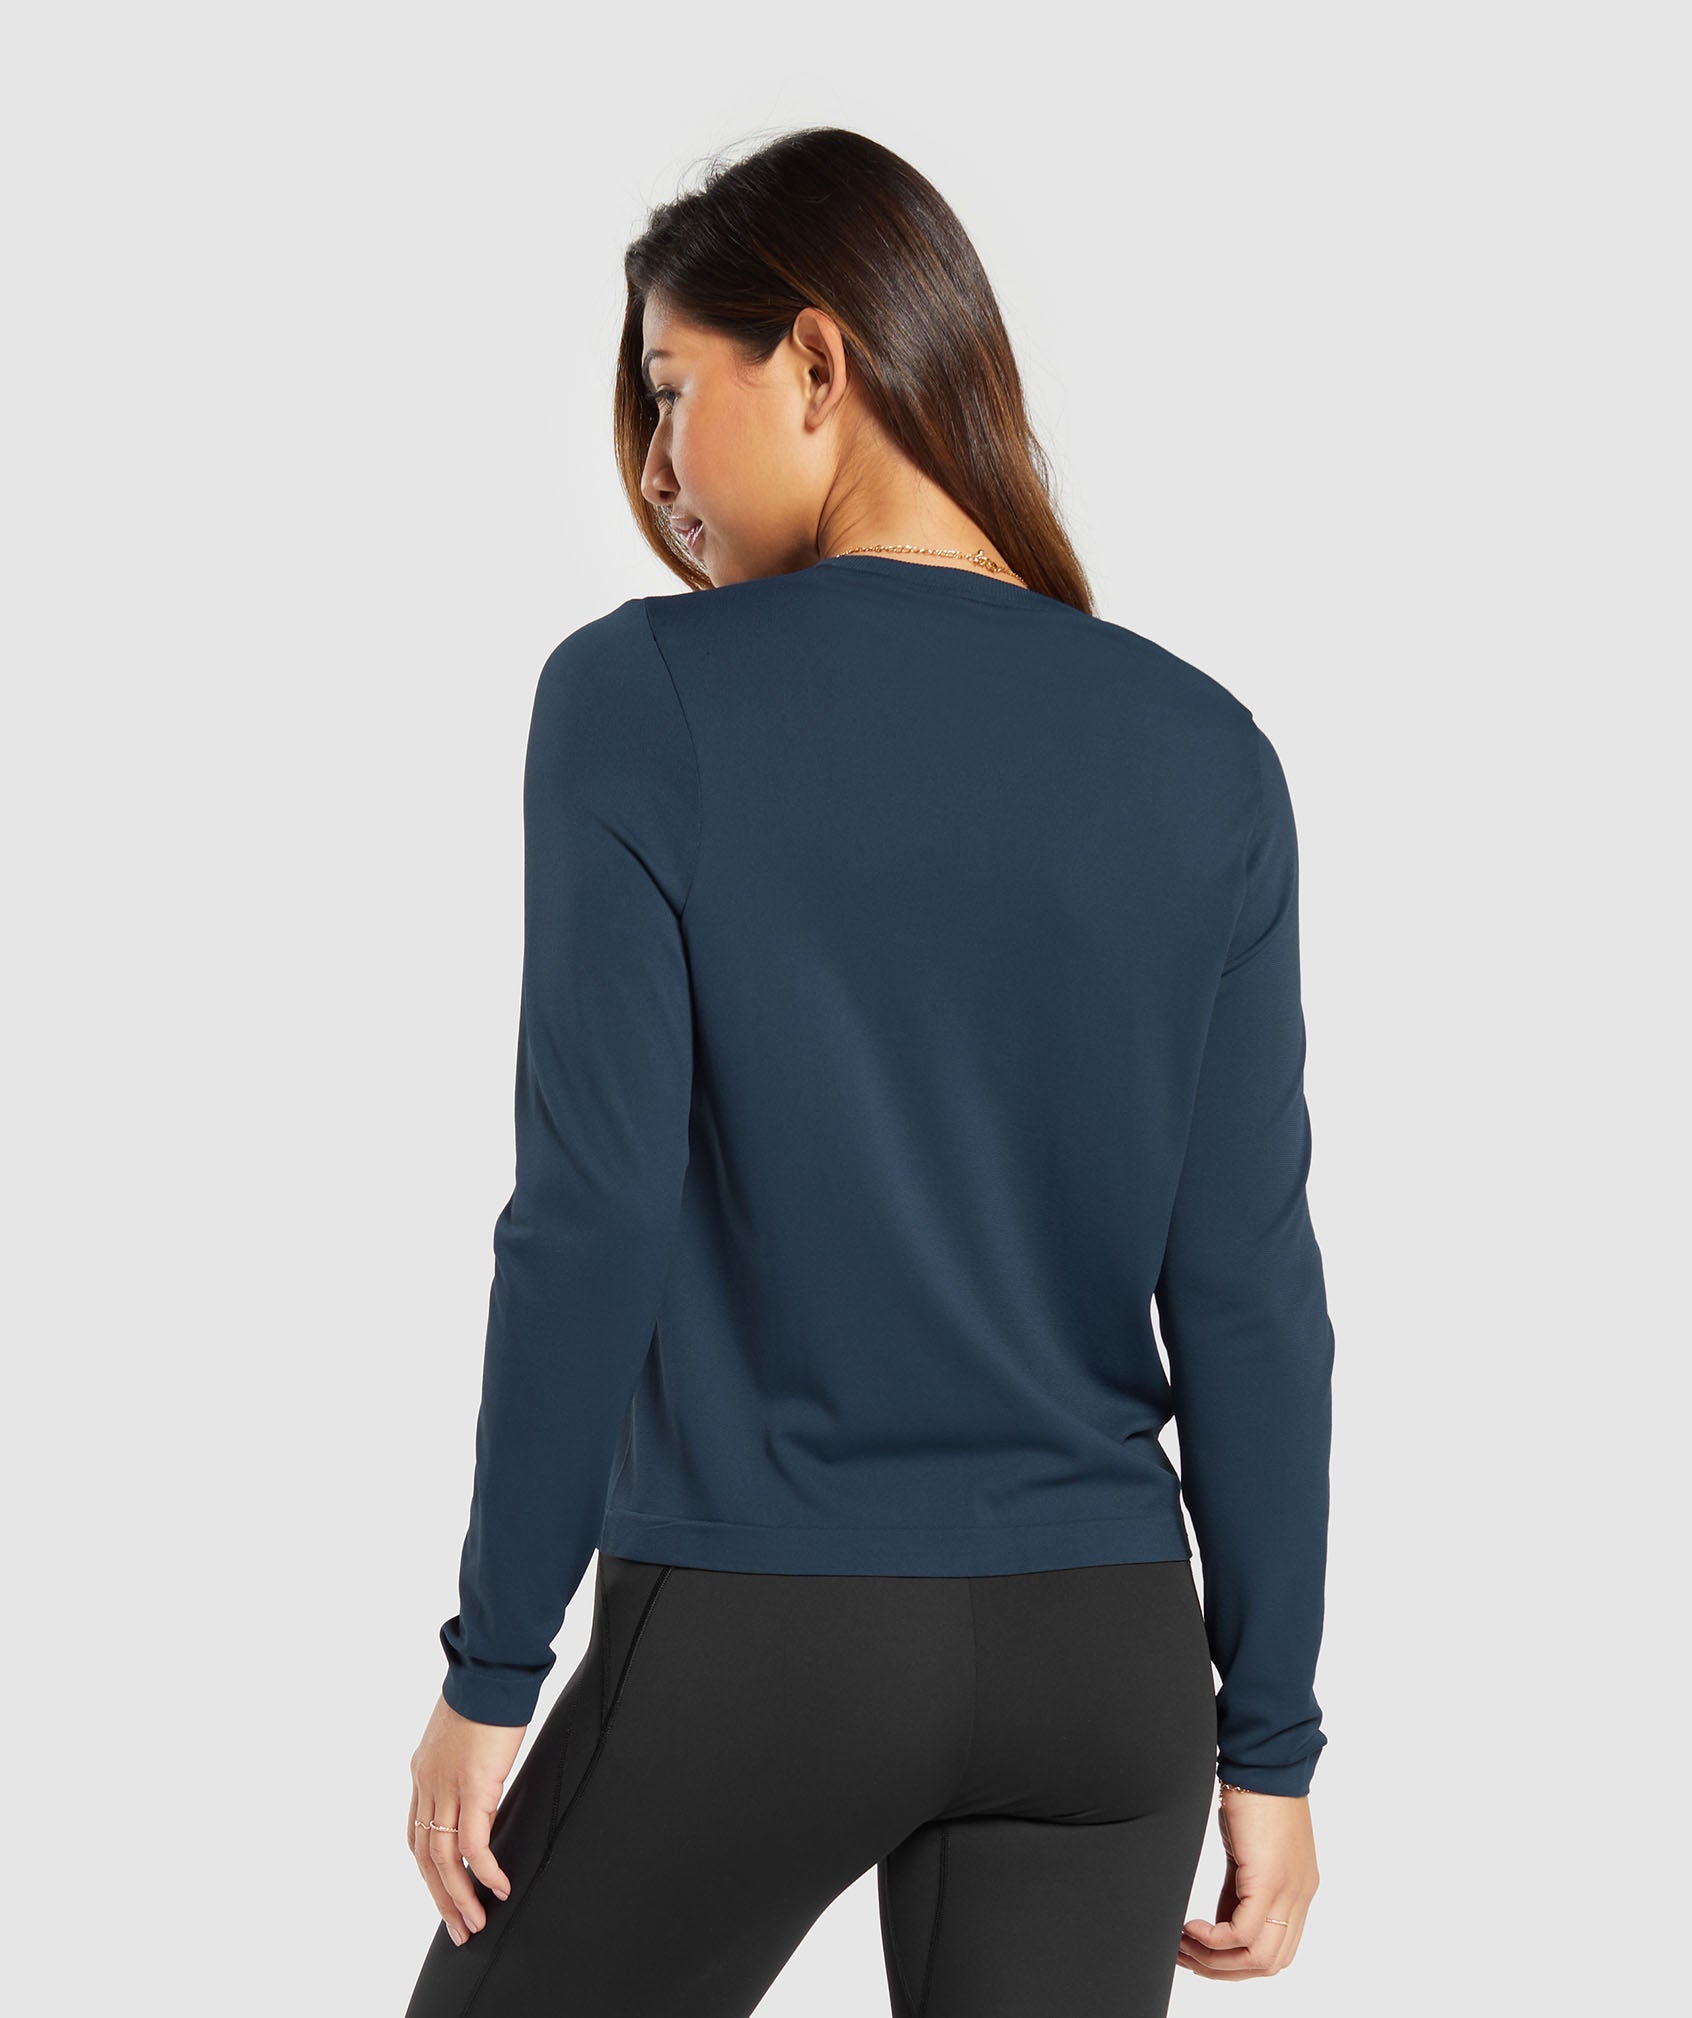 Everyday Seamless Long Sleeve Top in Navy - view 2